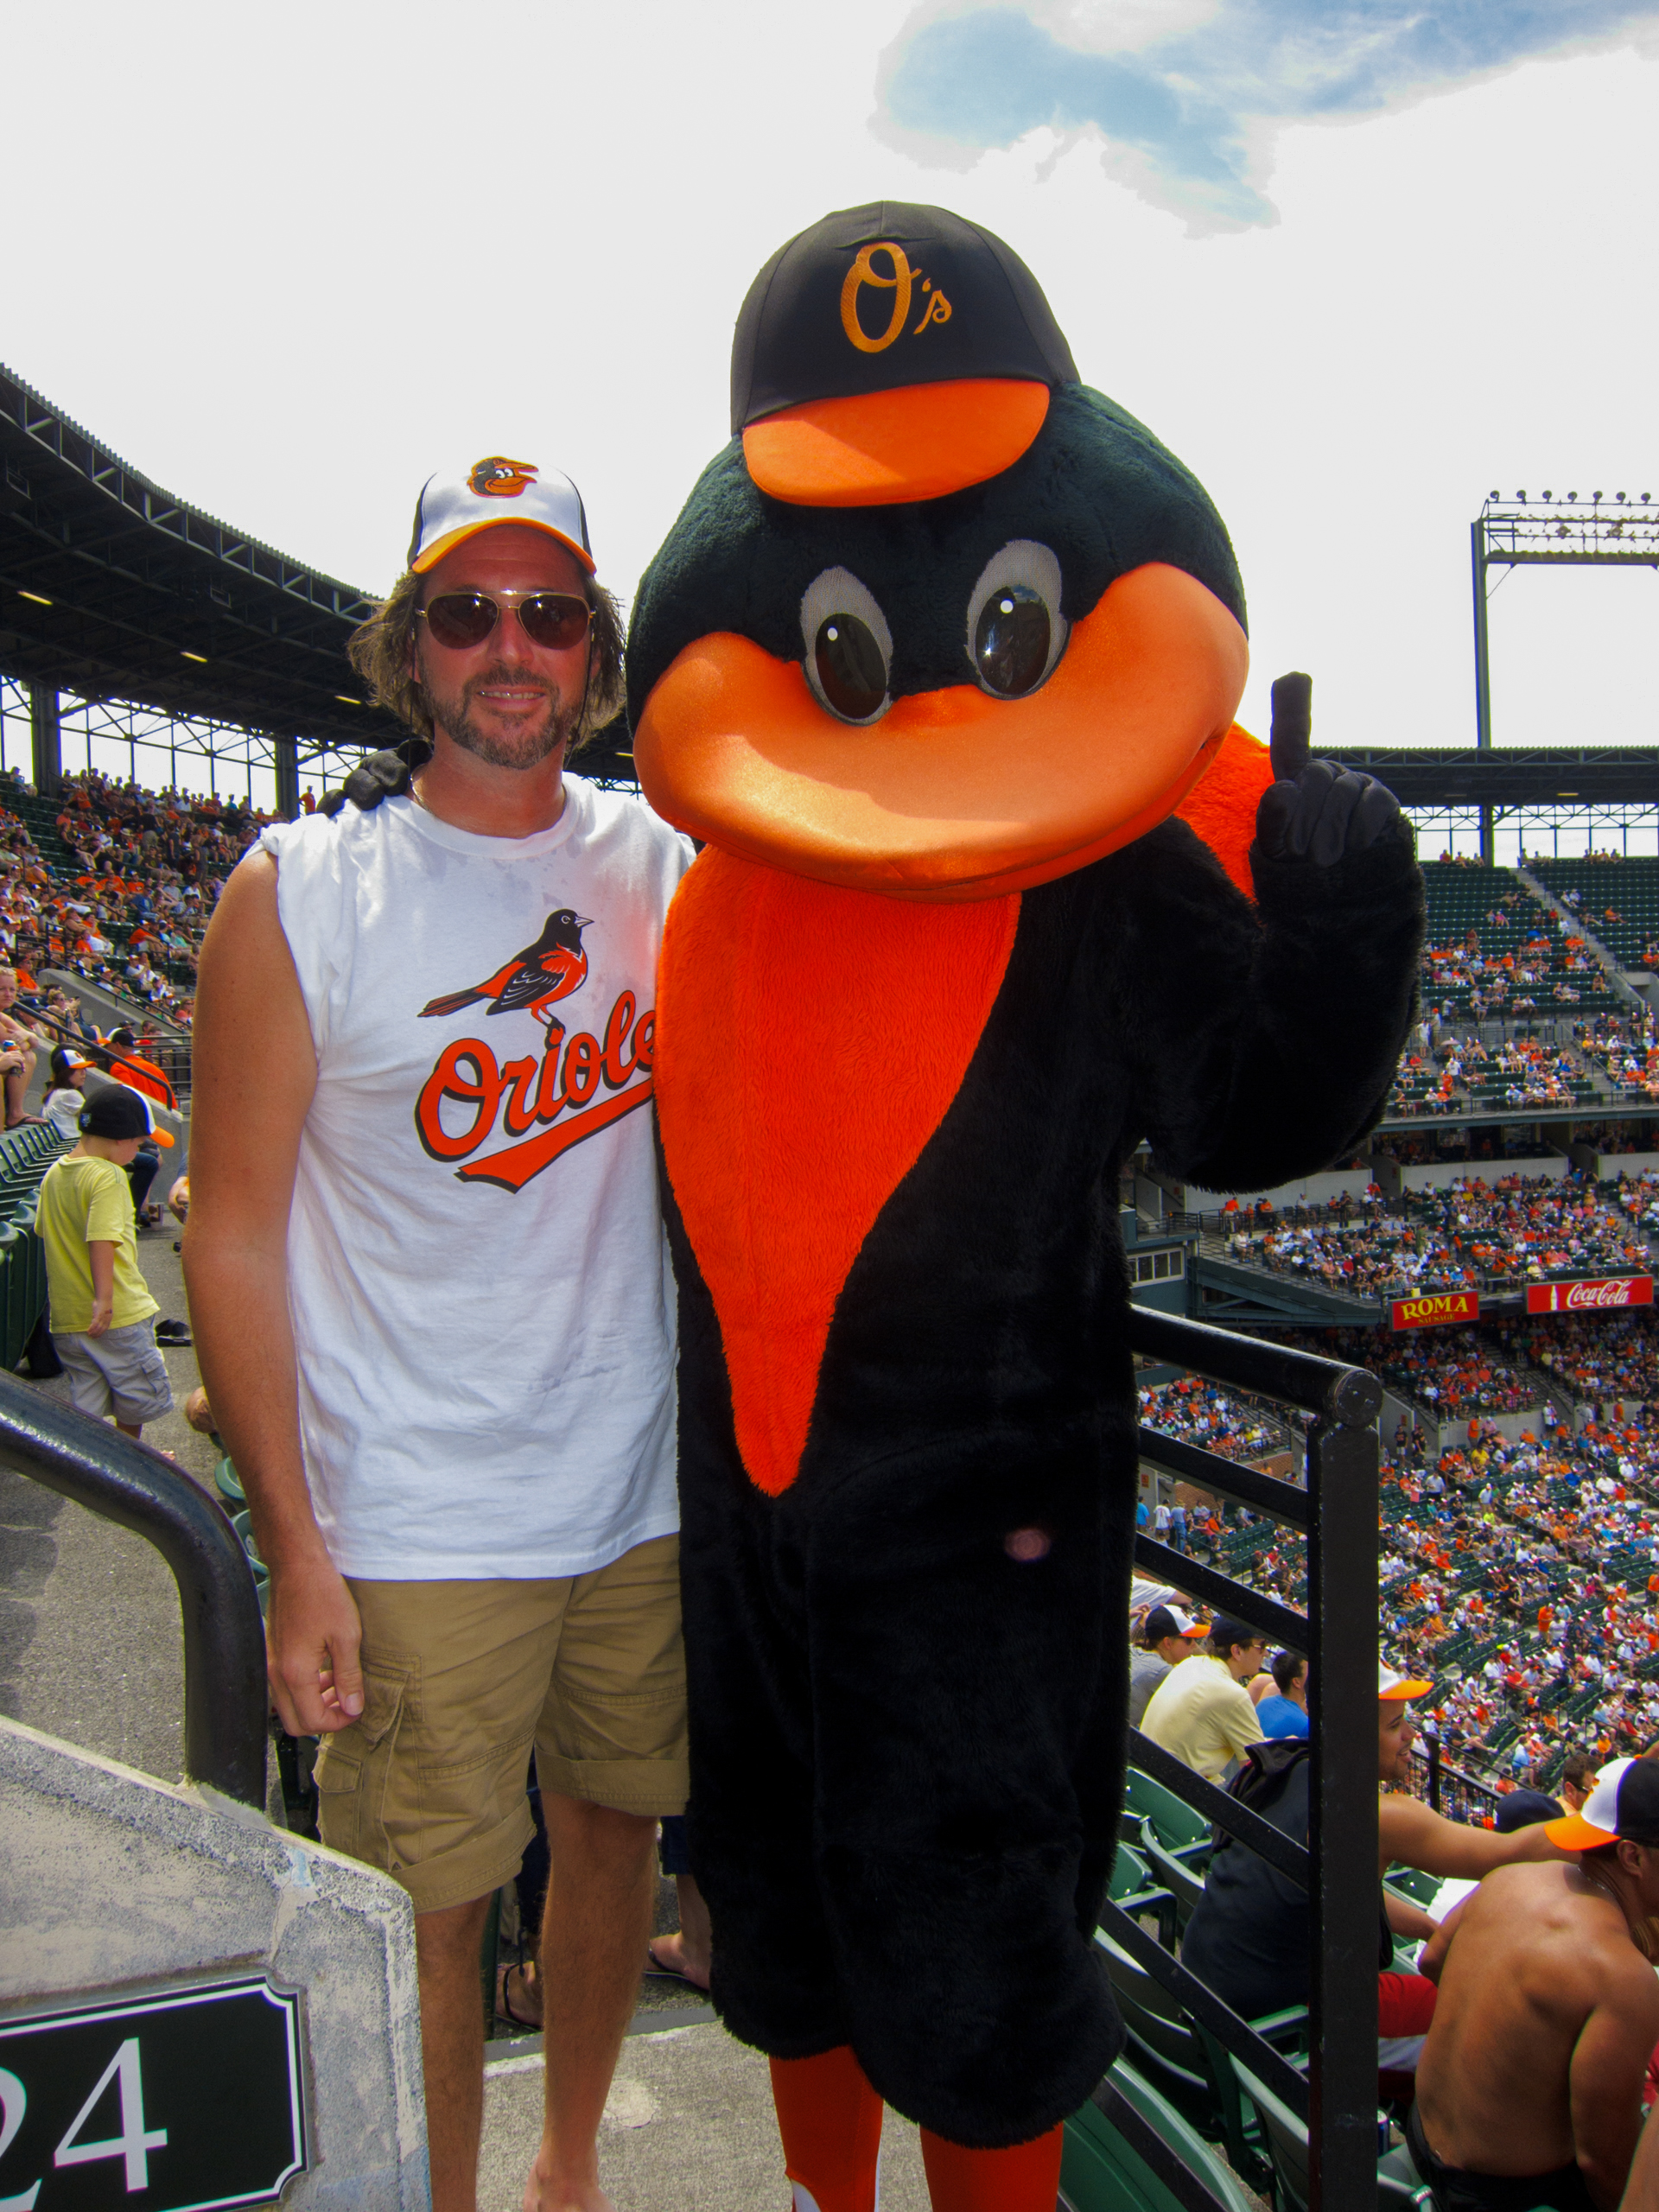 Posing with the Oriole mascot